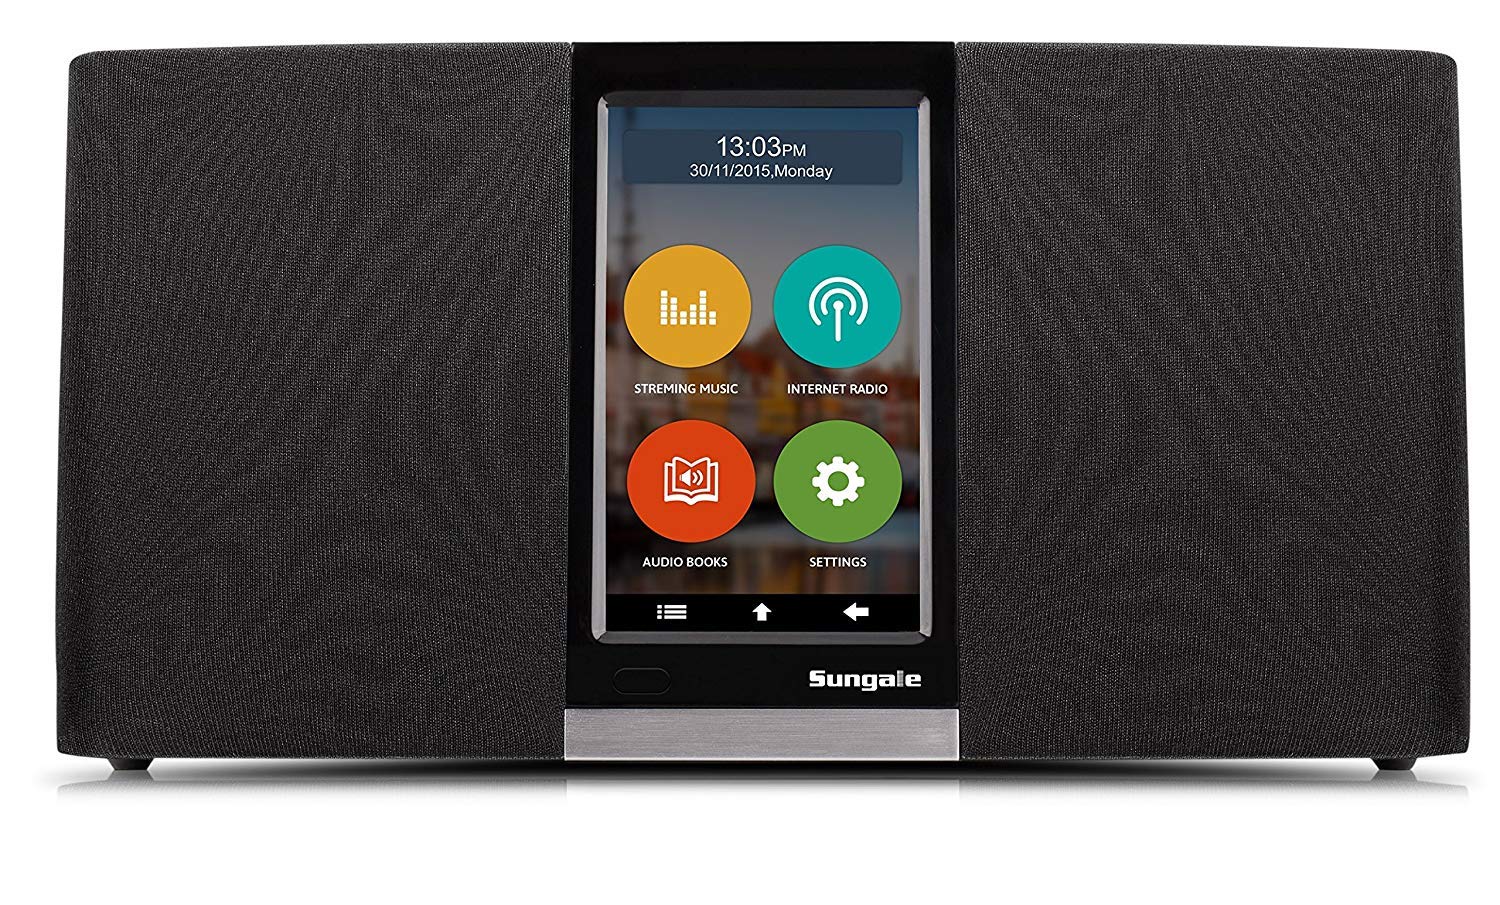 Sungale 3rd Gen. Wi-Fi Internet Radio with Easy Operation Touch Screen, Access Apps to Stream Music or Listen to Thousands of Internet Radio Stations, Frees up Your Smartphone, Black